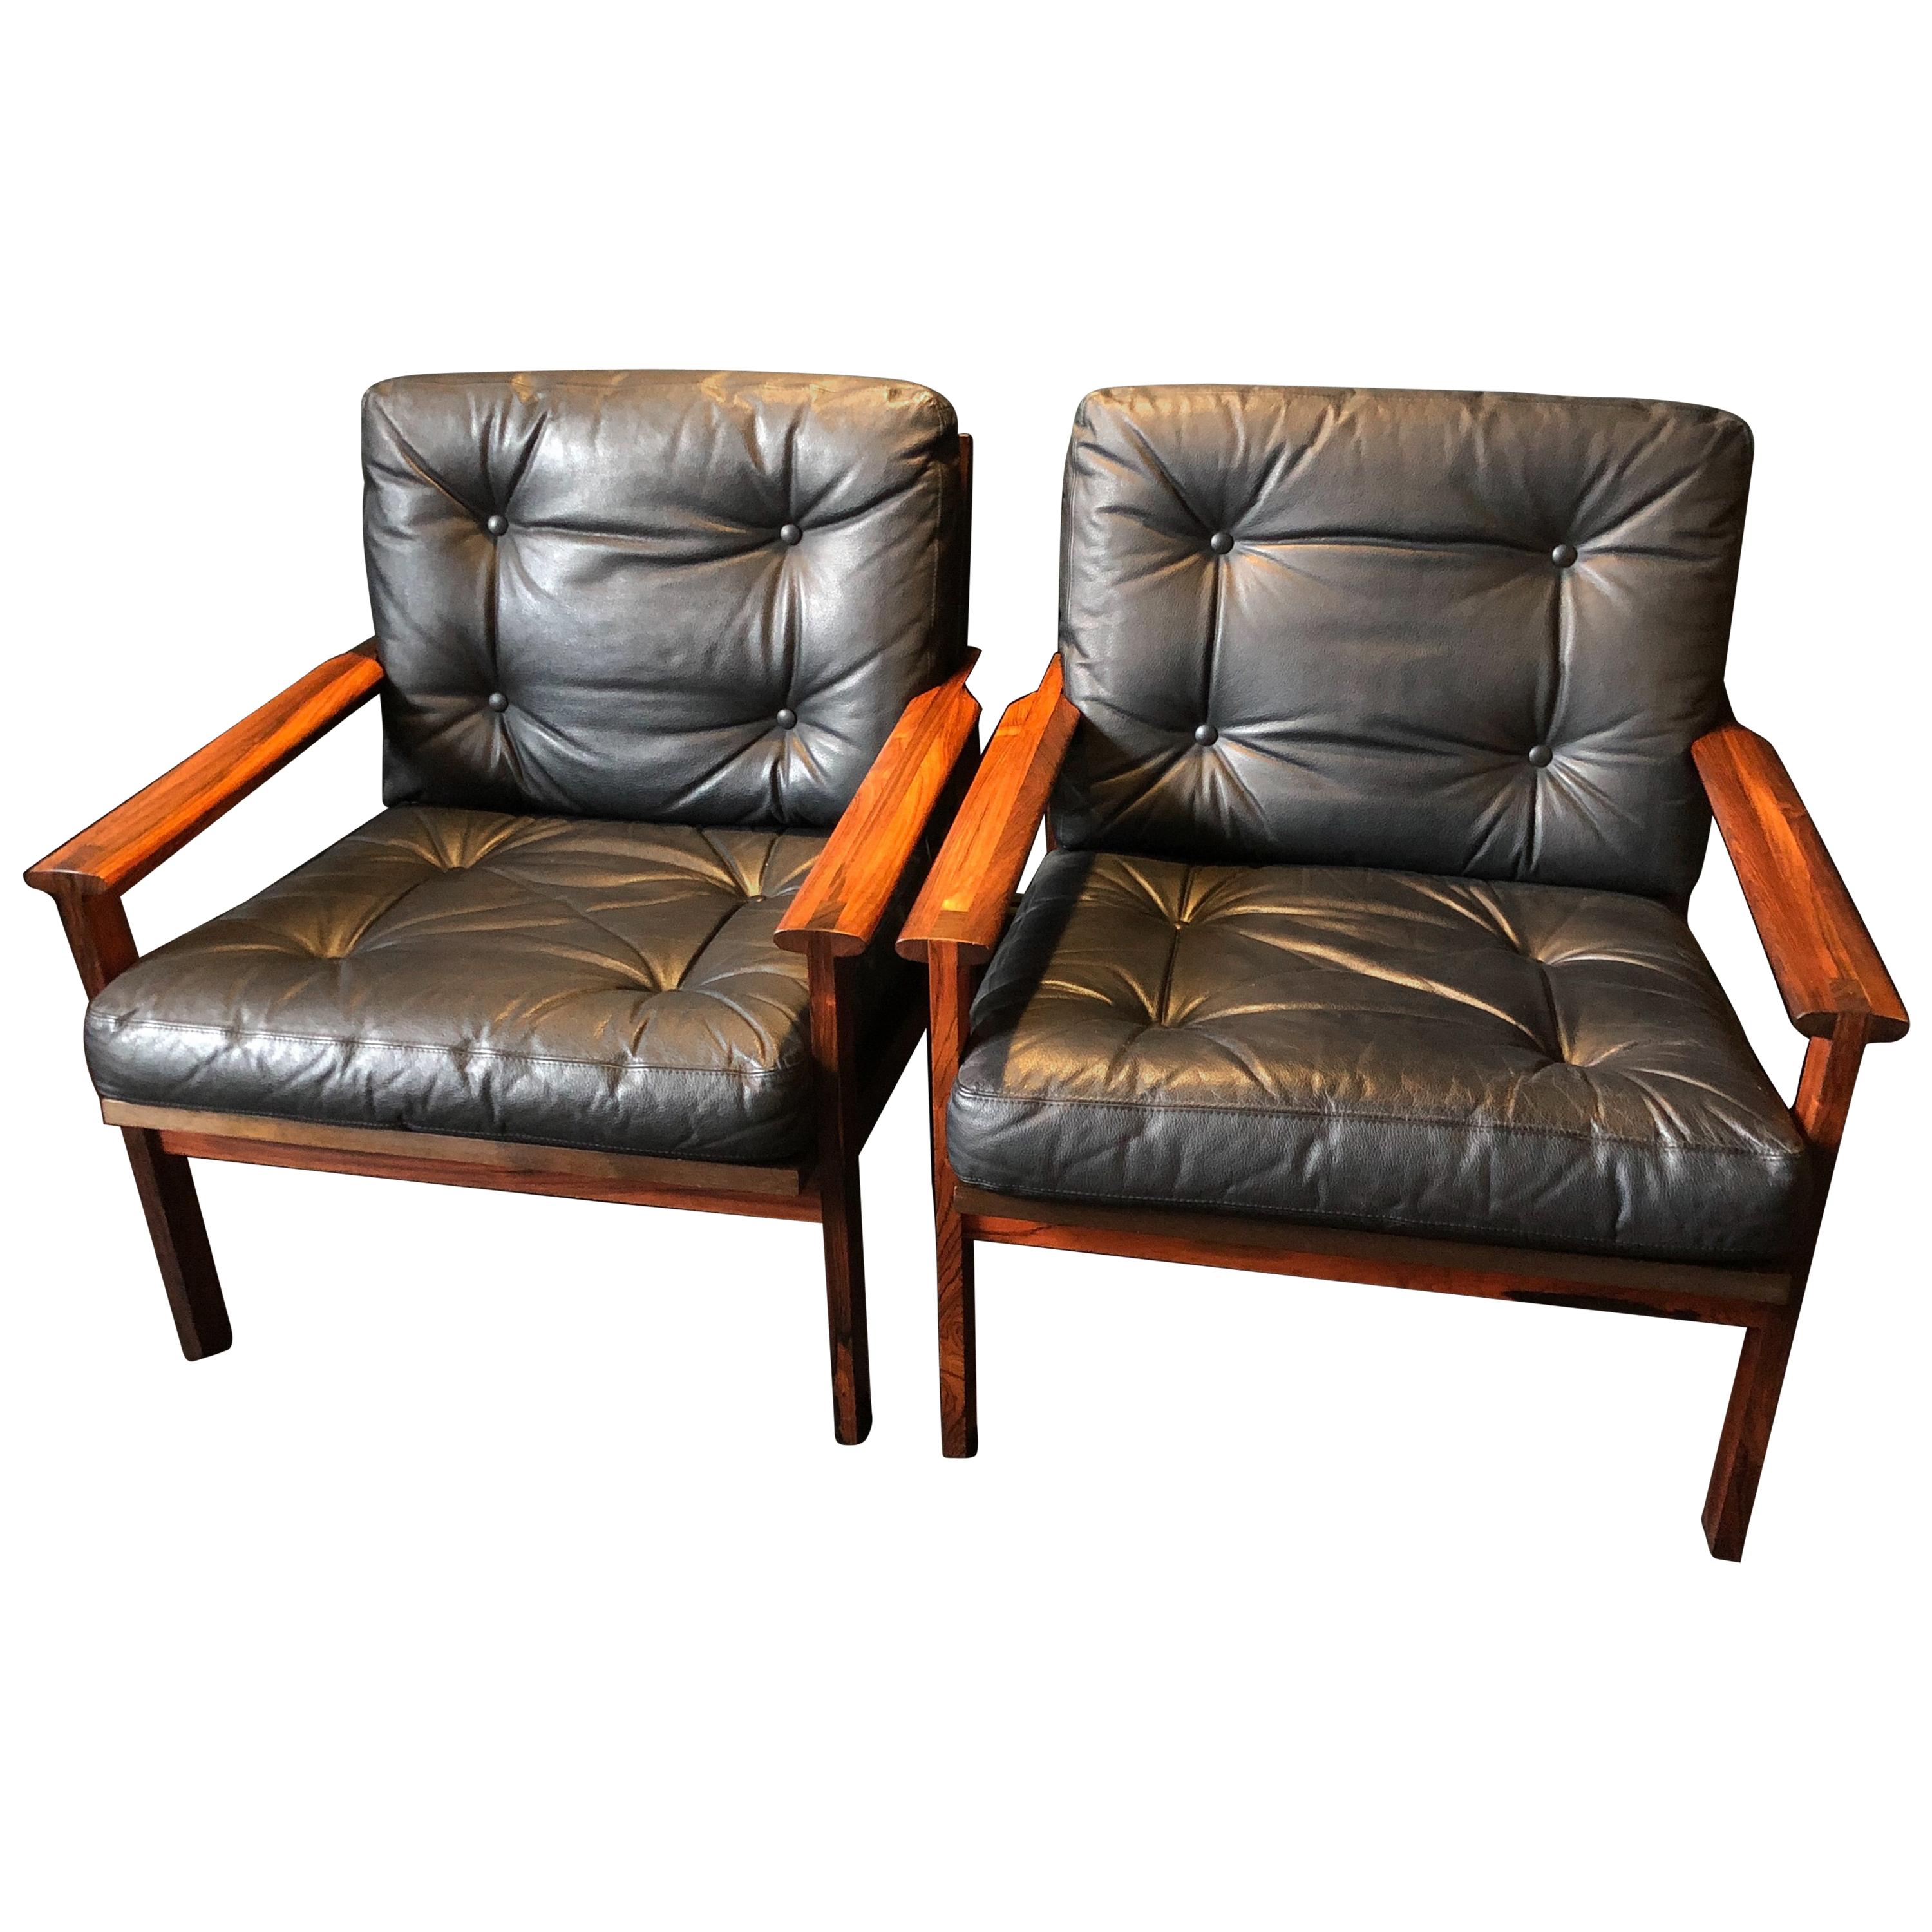 Pair of Midcentury Danish Armchairs by Illum Wikkelso, Rosewood and Leather